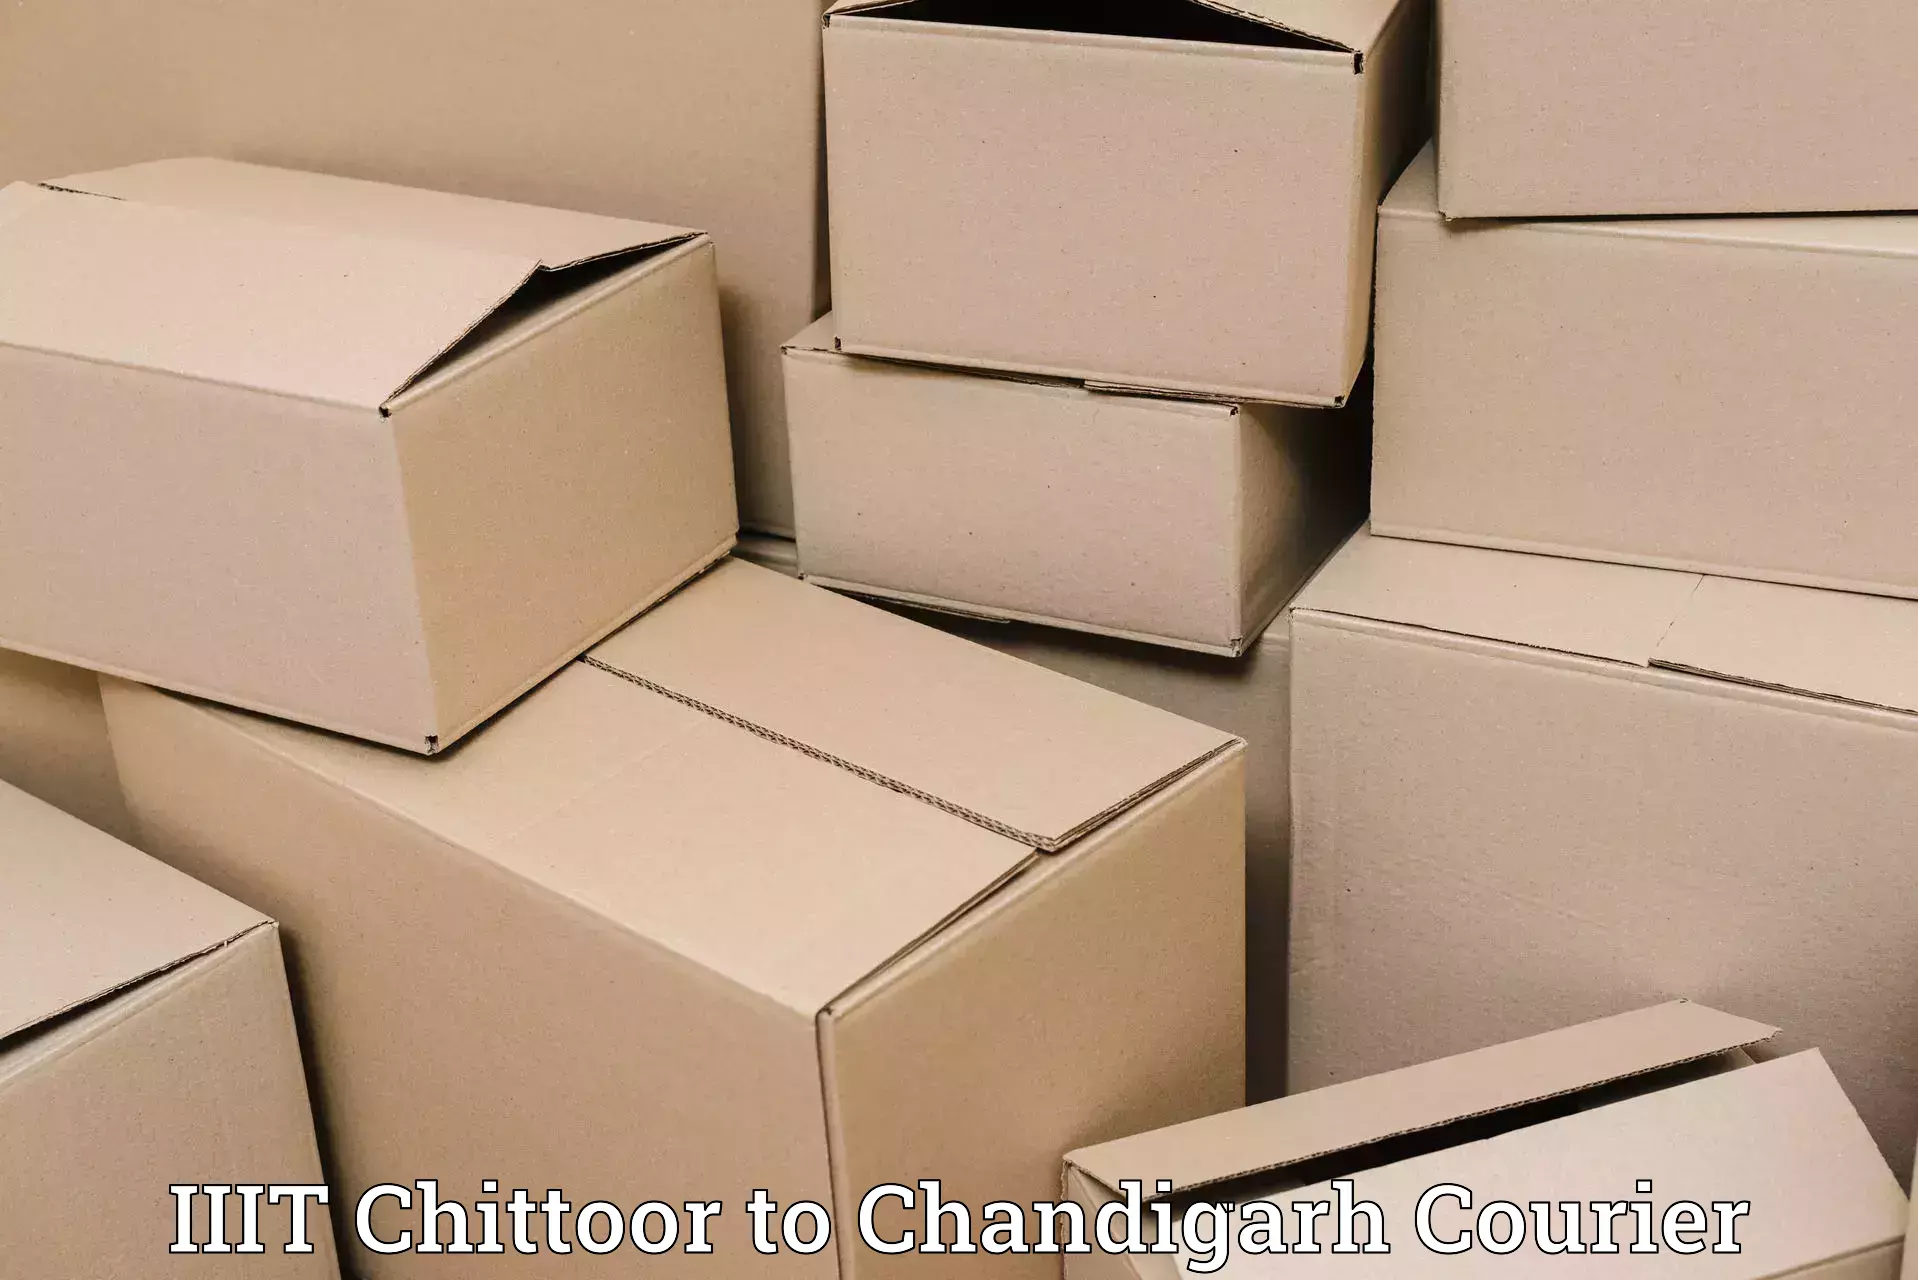 24-hour delivery options IIIT Chittoor to Chandigarh